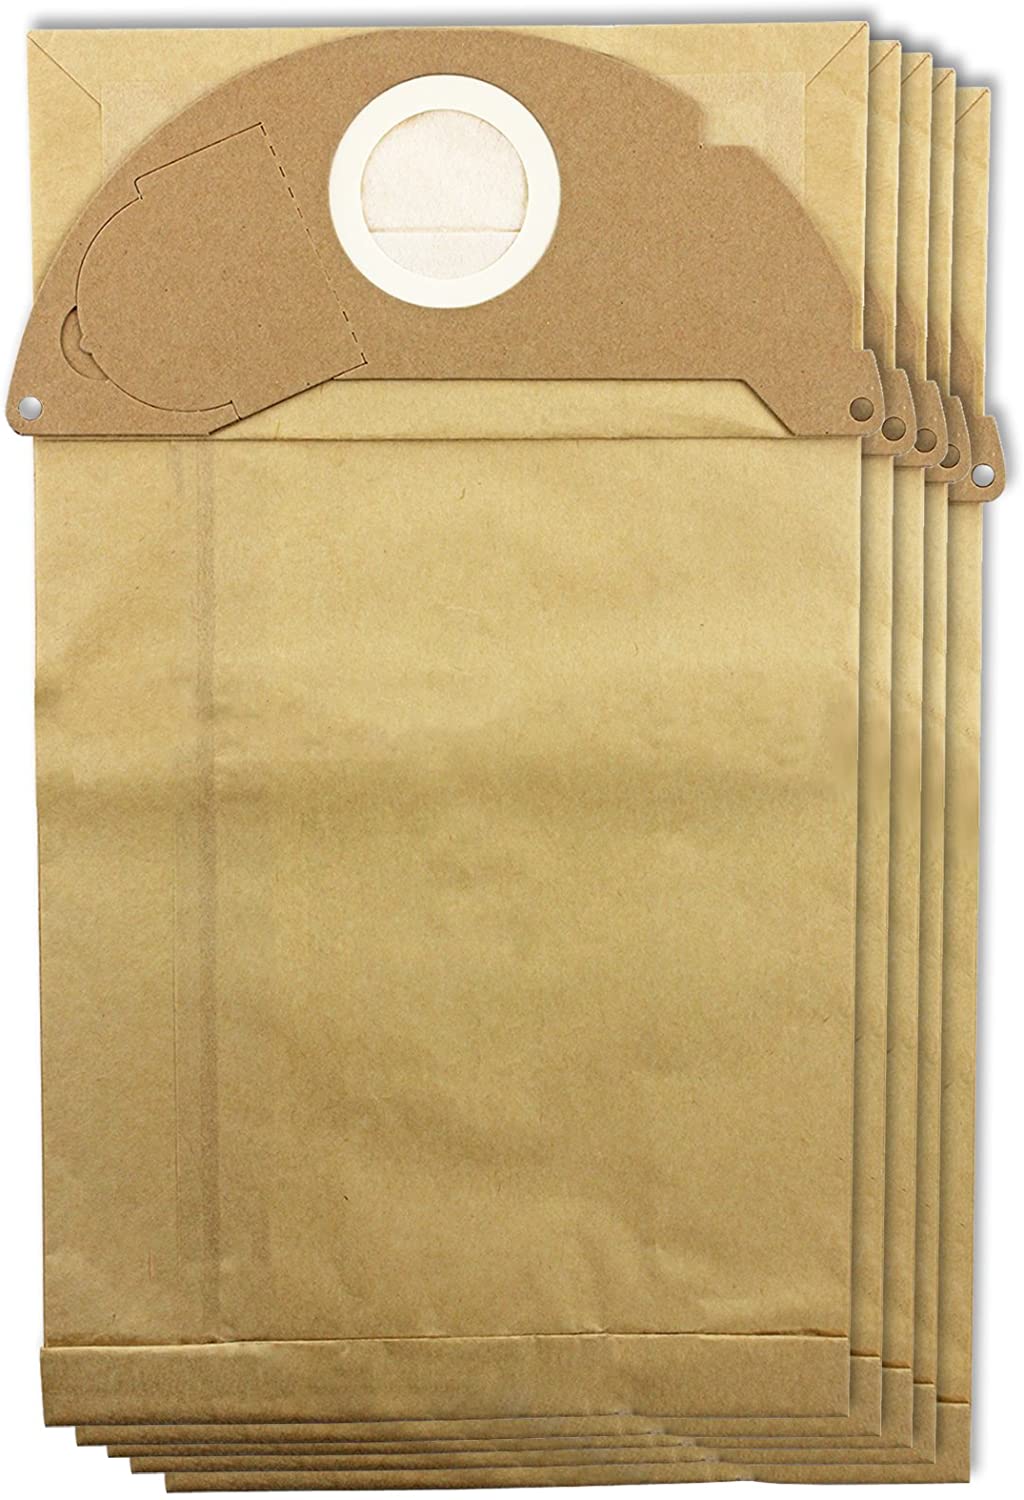 Strong Dust Bags for Karcher MV2 IPX4 Vacuum Cleaners (Pack of 5)